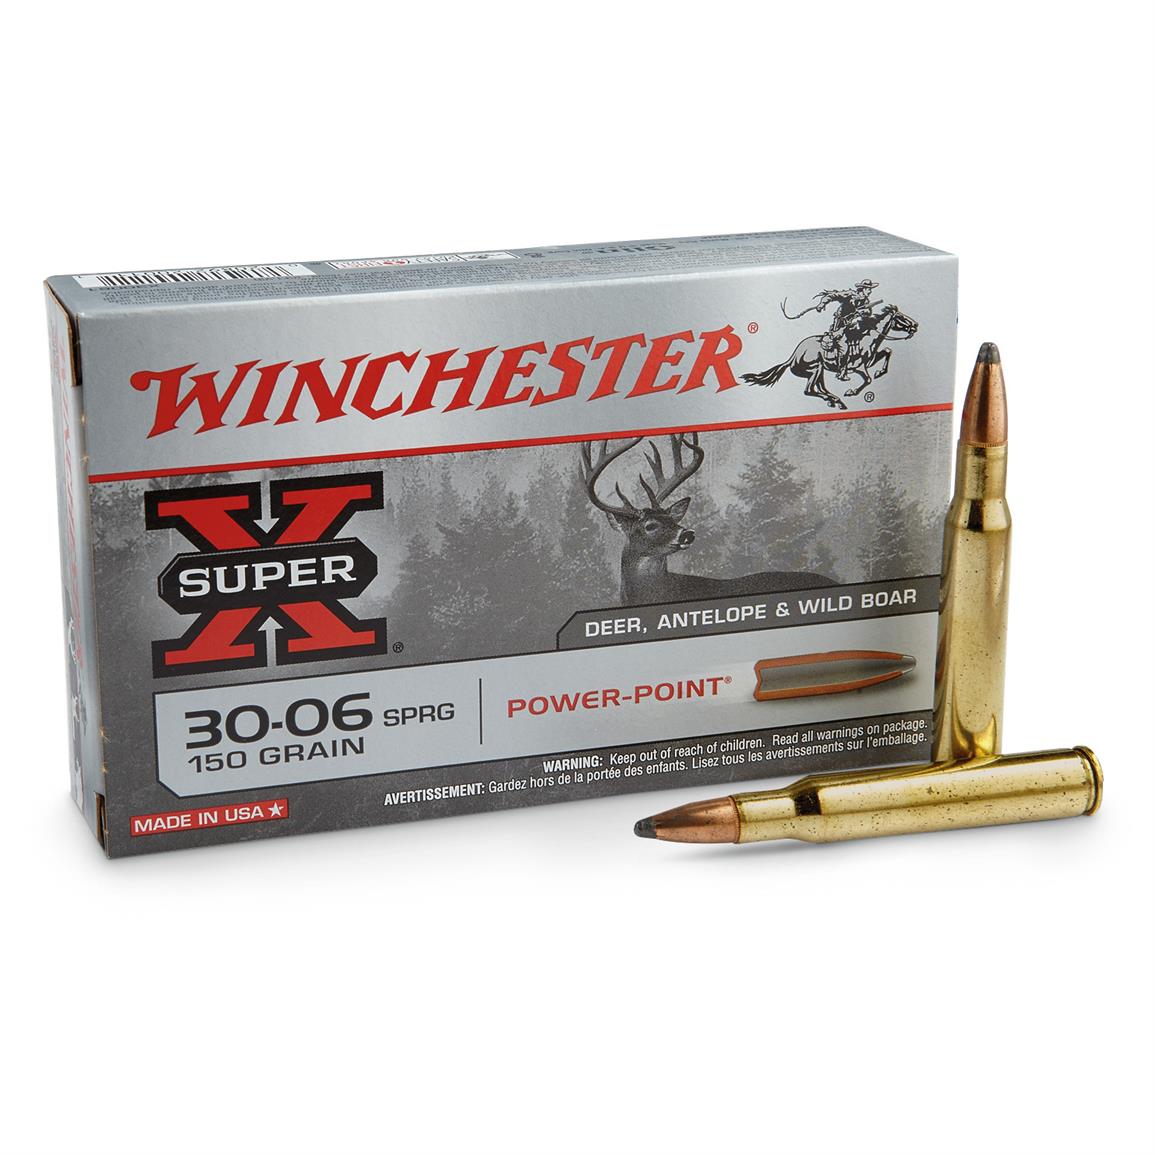 Winchester Super-X, .30-06 Springfield, PP, 150 Grain Of 500 Rounds